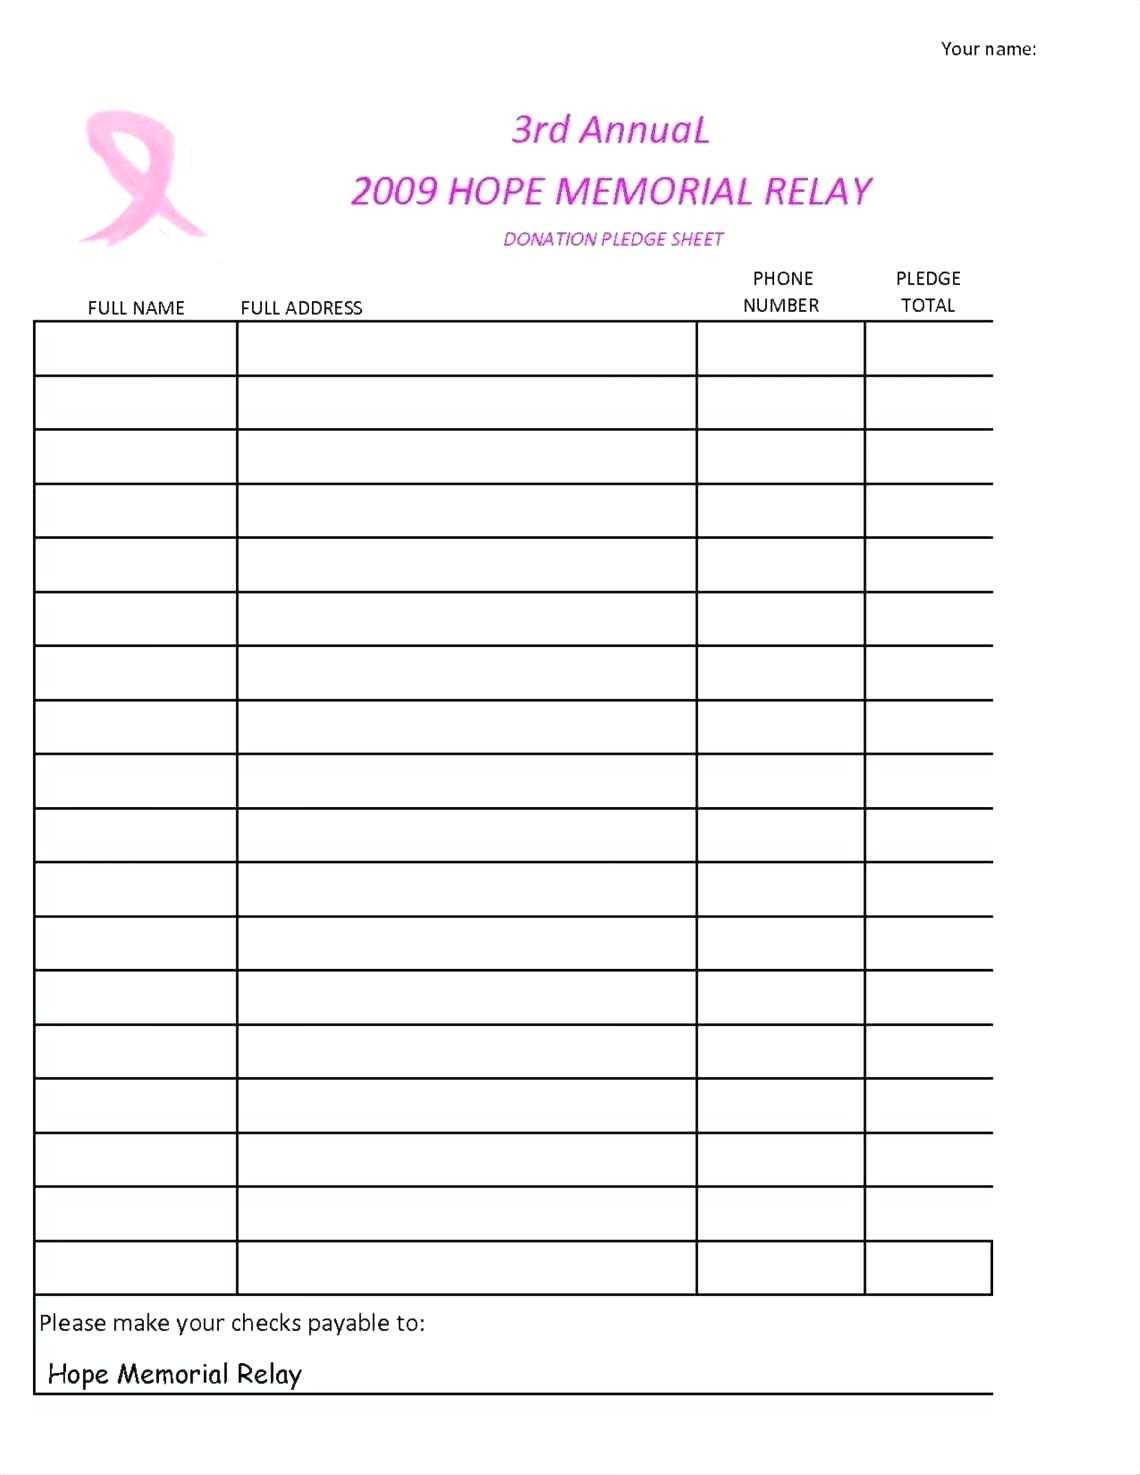 Spreadsheet Examples Church Pledge Card Ate Unique Sheets With Regard To Fundraising Pledge Card Template